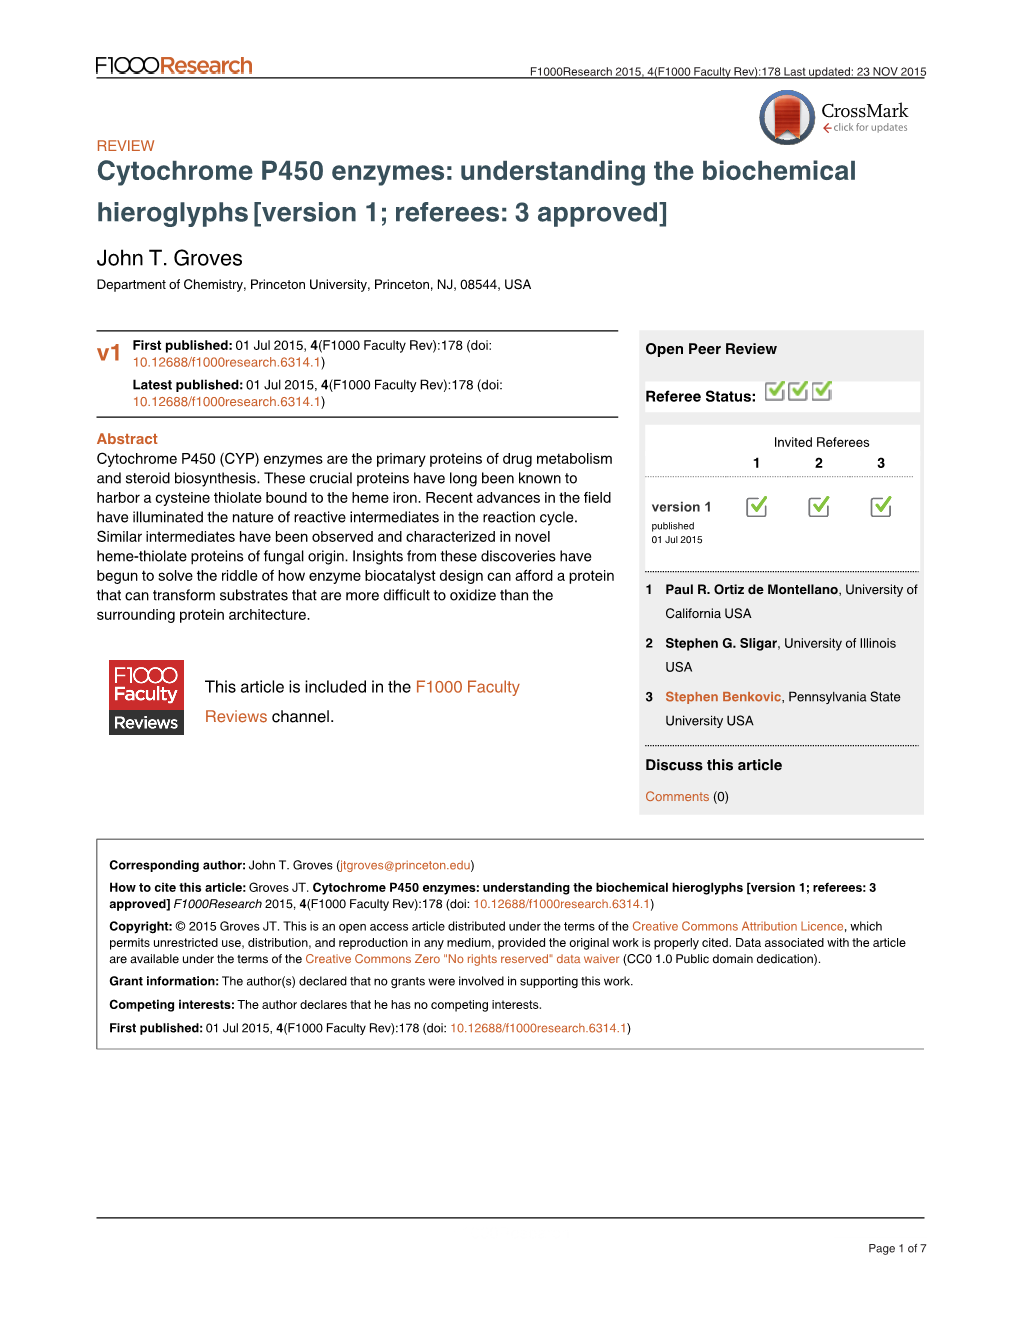 Cytochrome P450 Enzymes: Understanding the Biochemical Hieroglyphs [Version 1; Referees: 3 Approved] John T